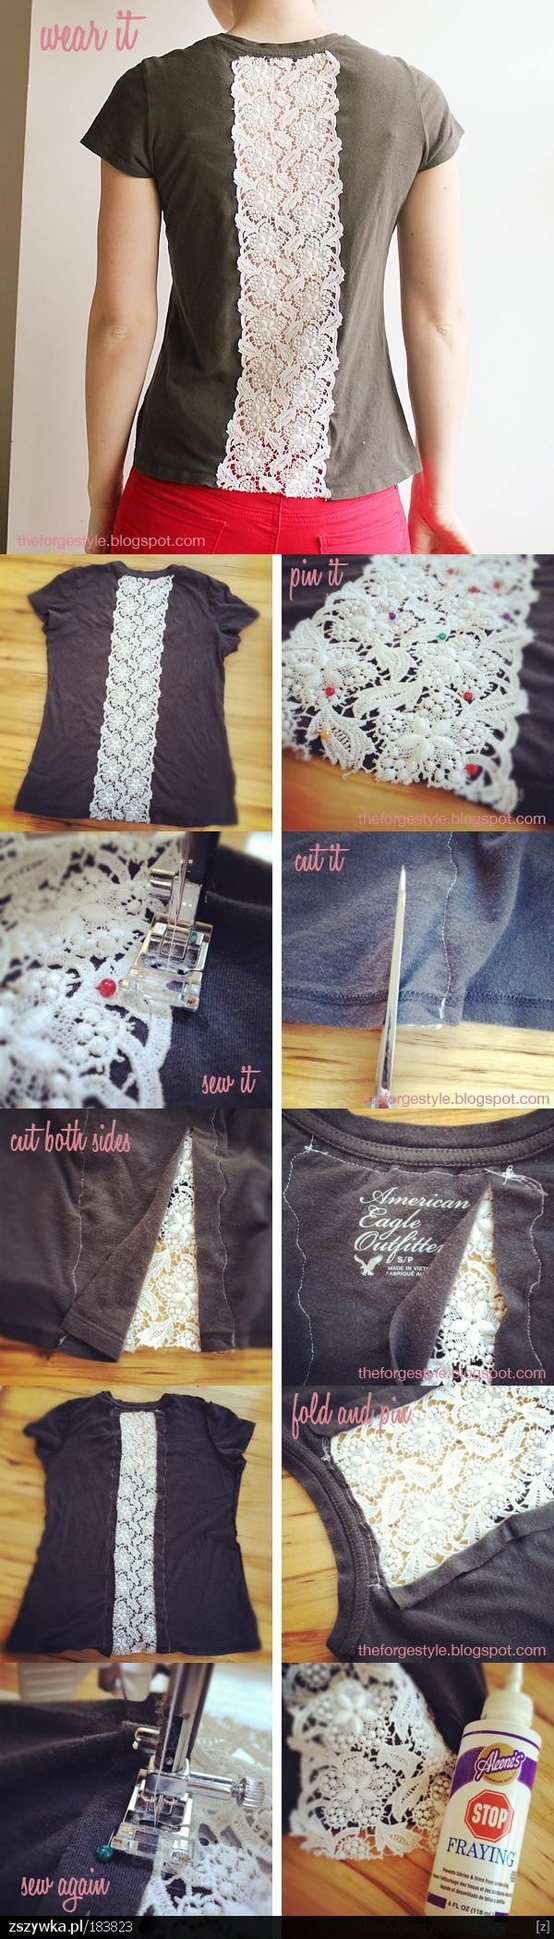 DIY: Insert vintage lace in t-shirt